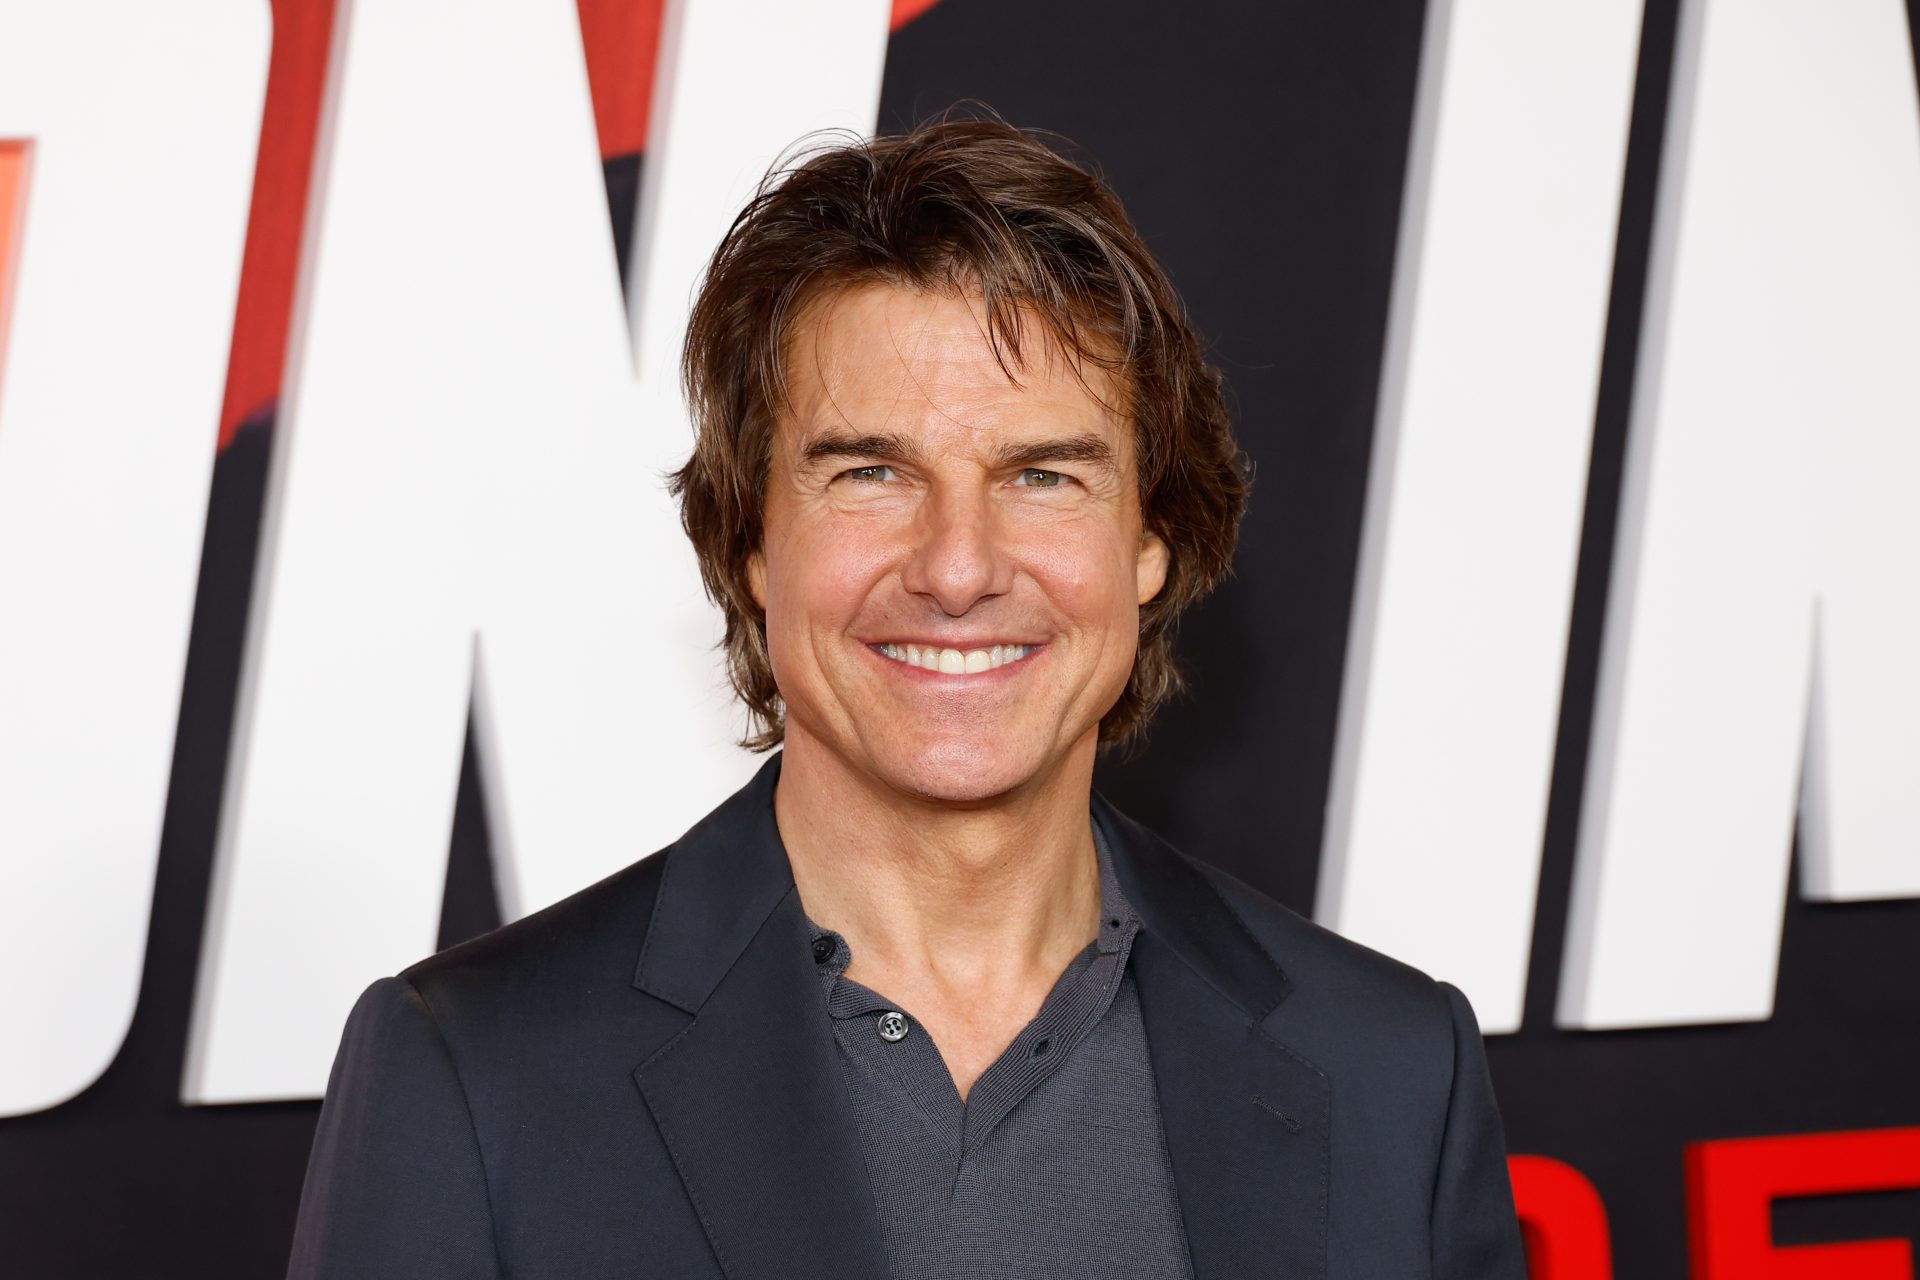 How many Tom Cruise movies have you seen?